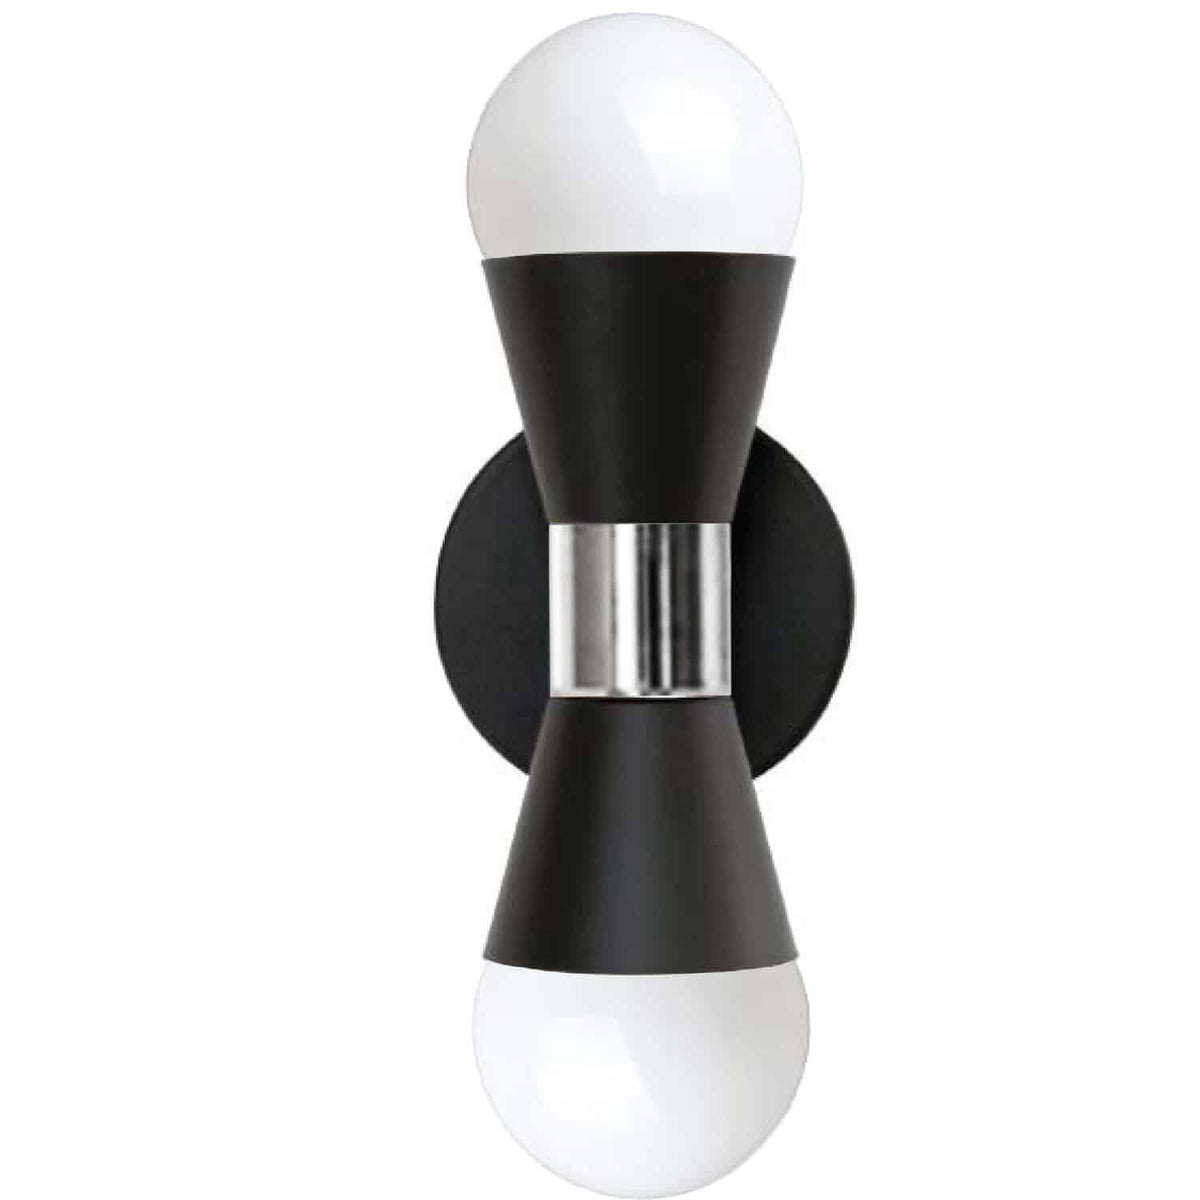 Dainolite - Fortuna Wall Sconce - FOR-72W-MB-PC | Montreal Lighting & Hardware